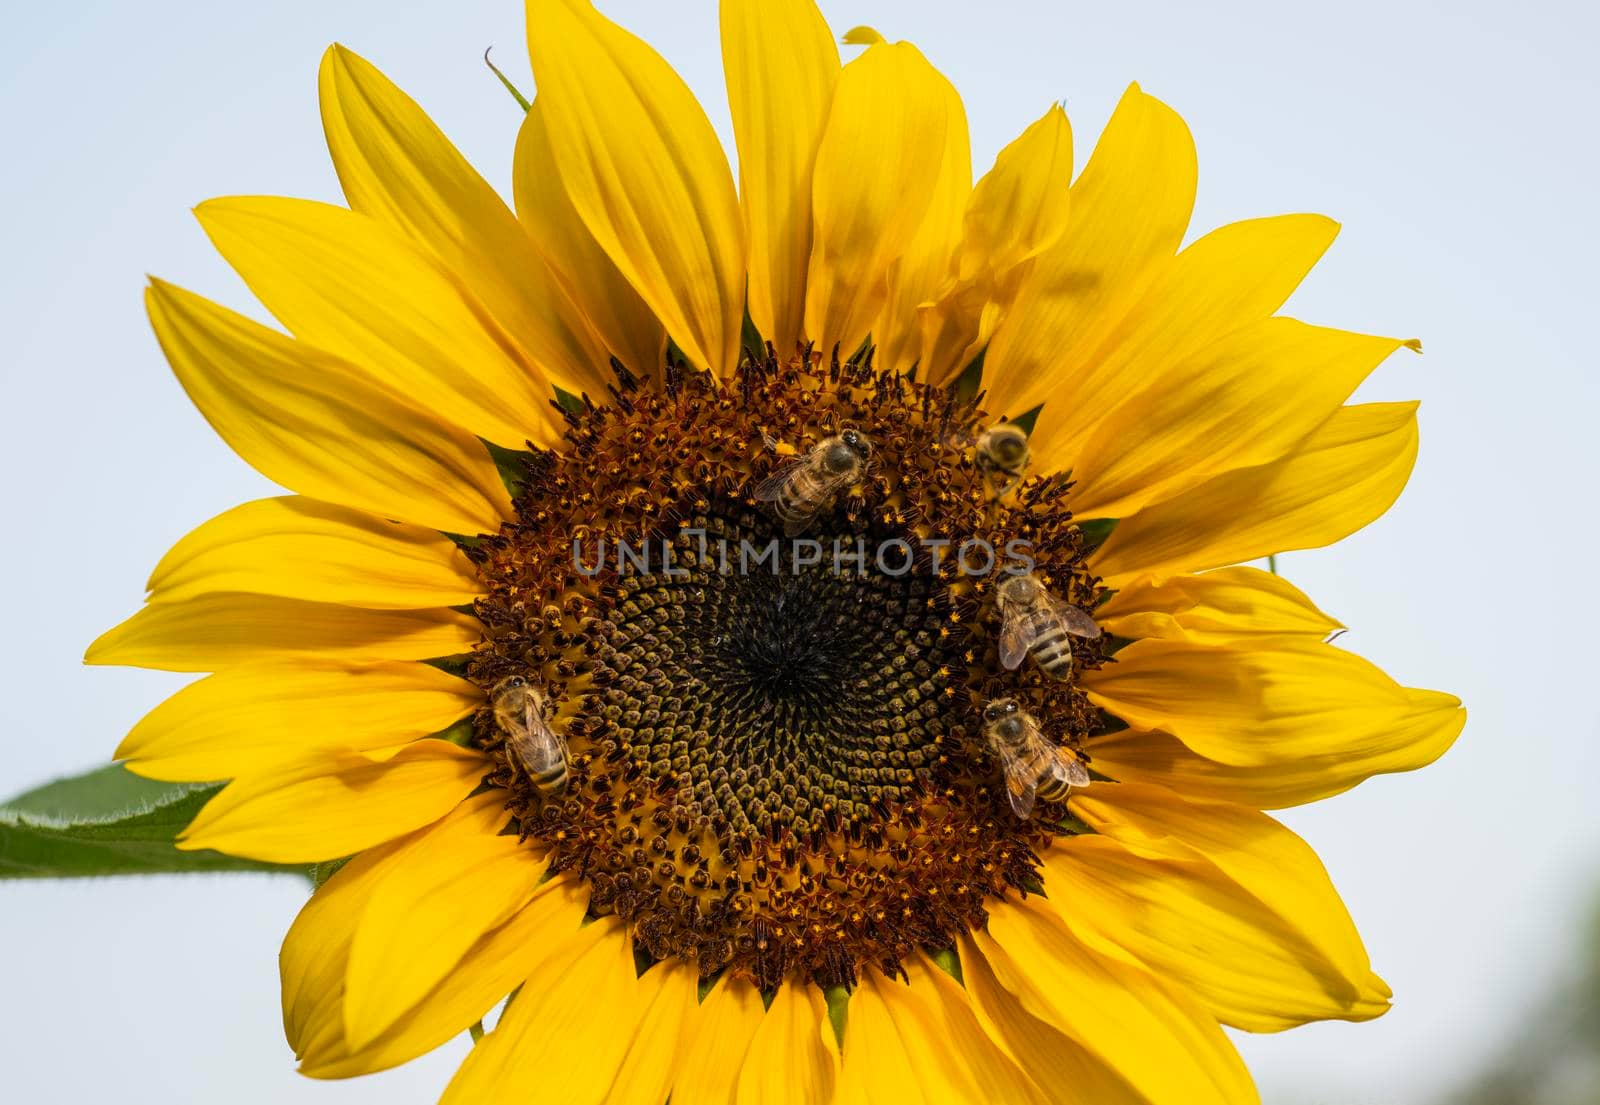 Closeup of a sunflower yellow flower head with honey bees by paulvinten